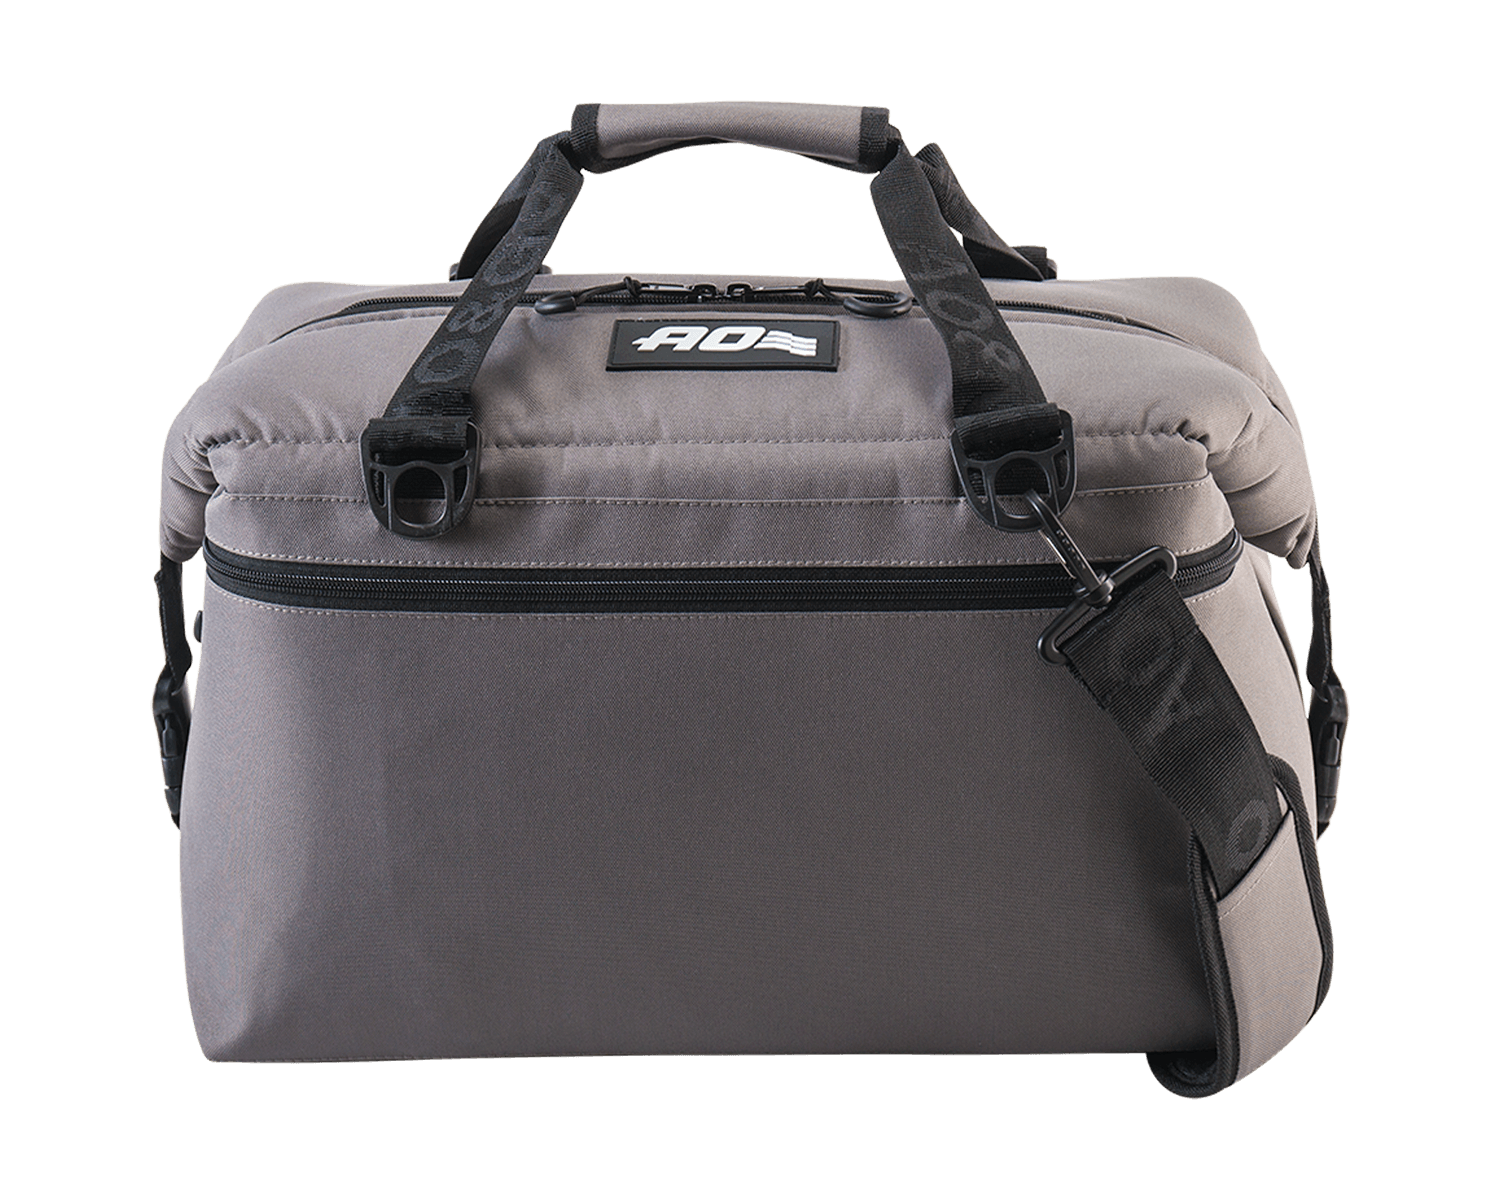 American Outdoors 2 ft. Insulated Fish Bag/Cooler at Tractor Supply Co.